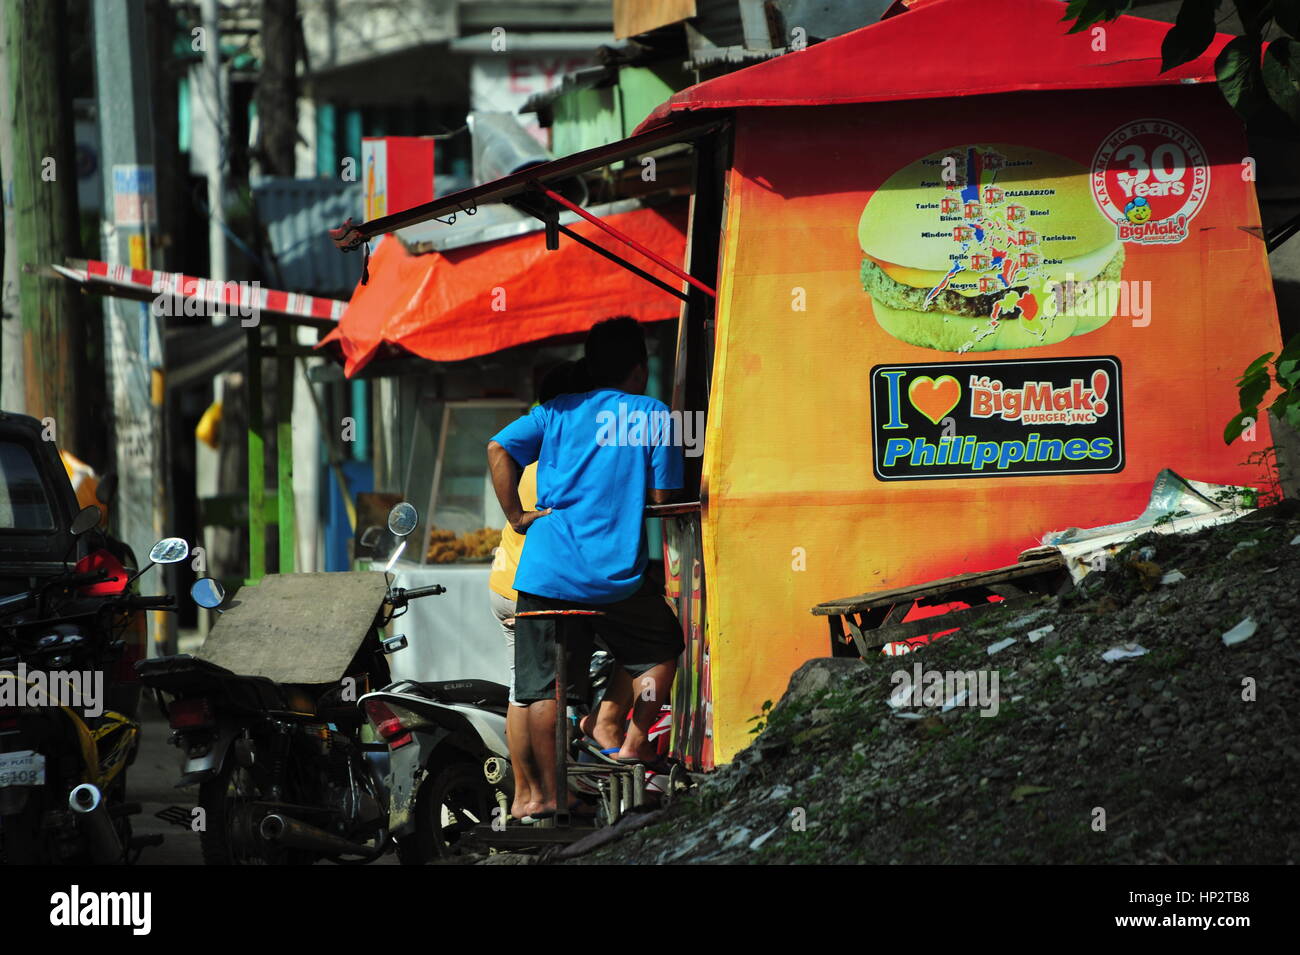 Food Stall, Maasin City, Leyte, Philippines Stock Photo